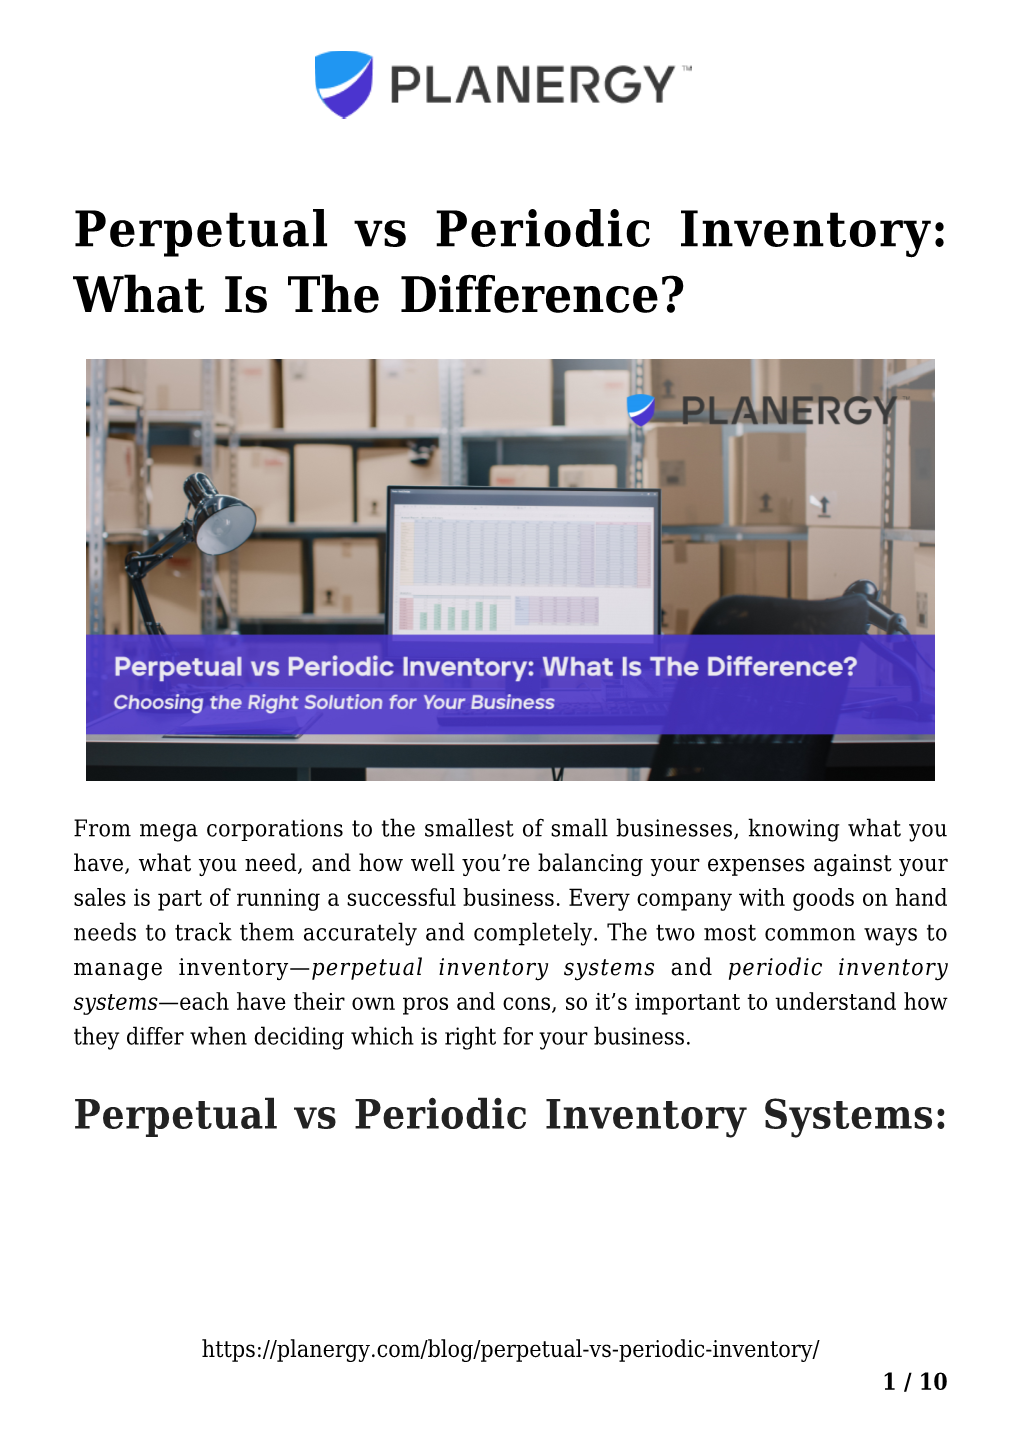 Perpetual Vs Periodic Inventory: What Is the Difference?